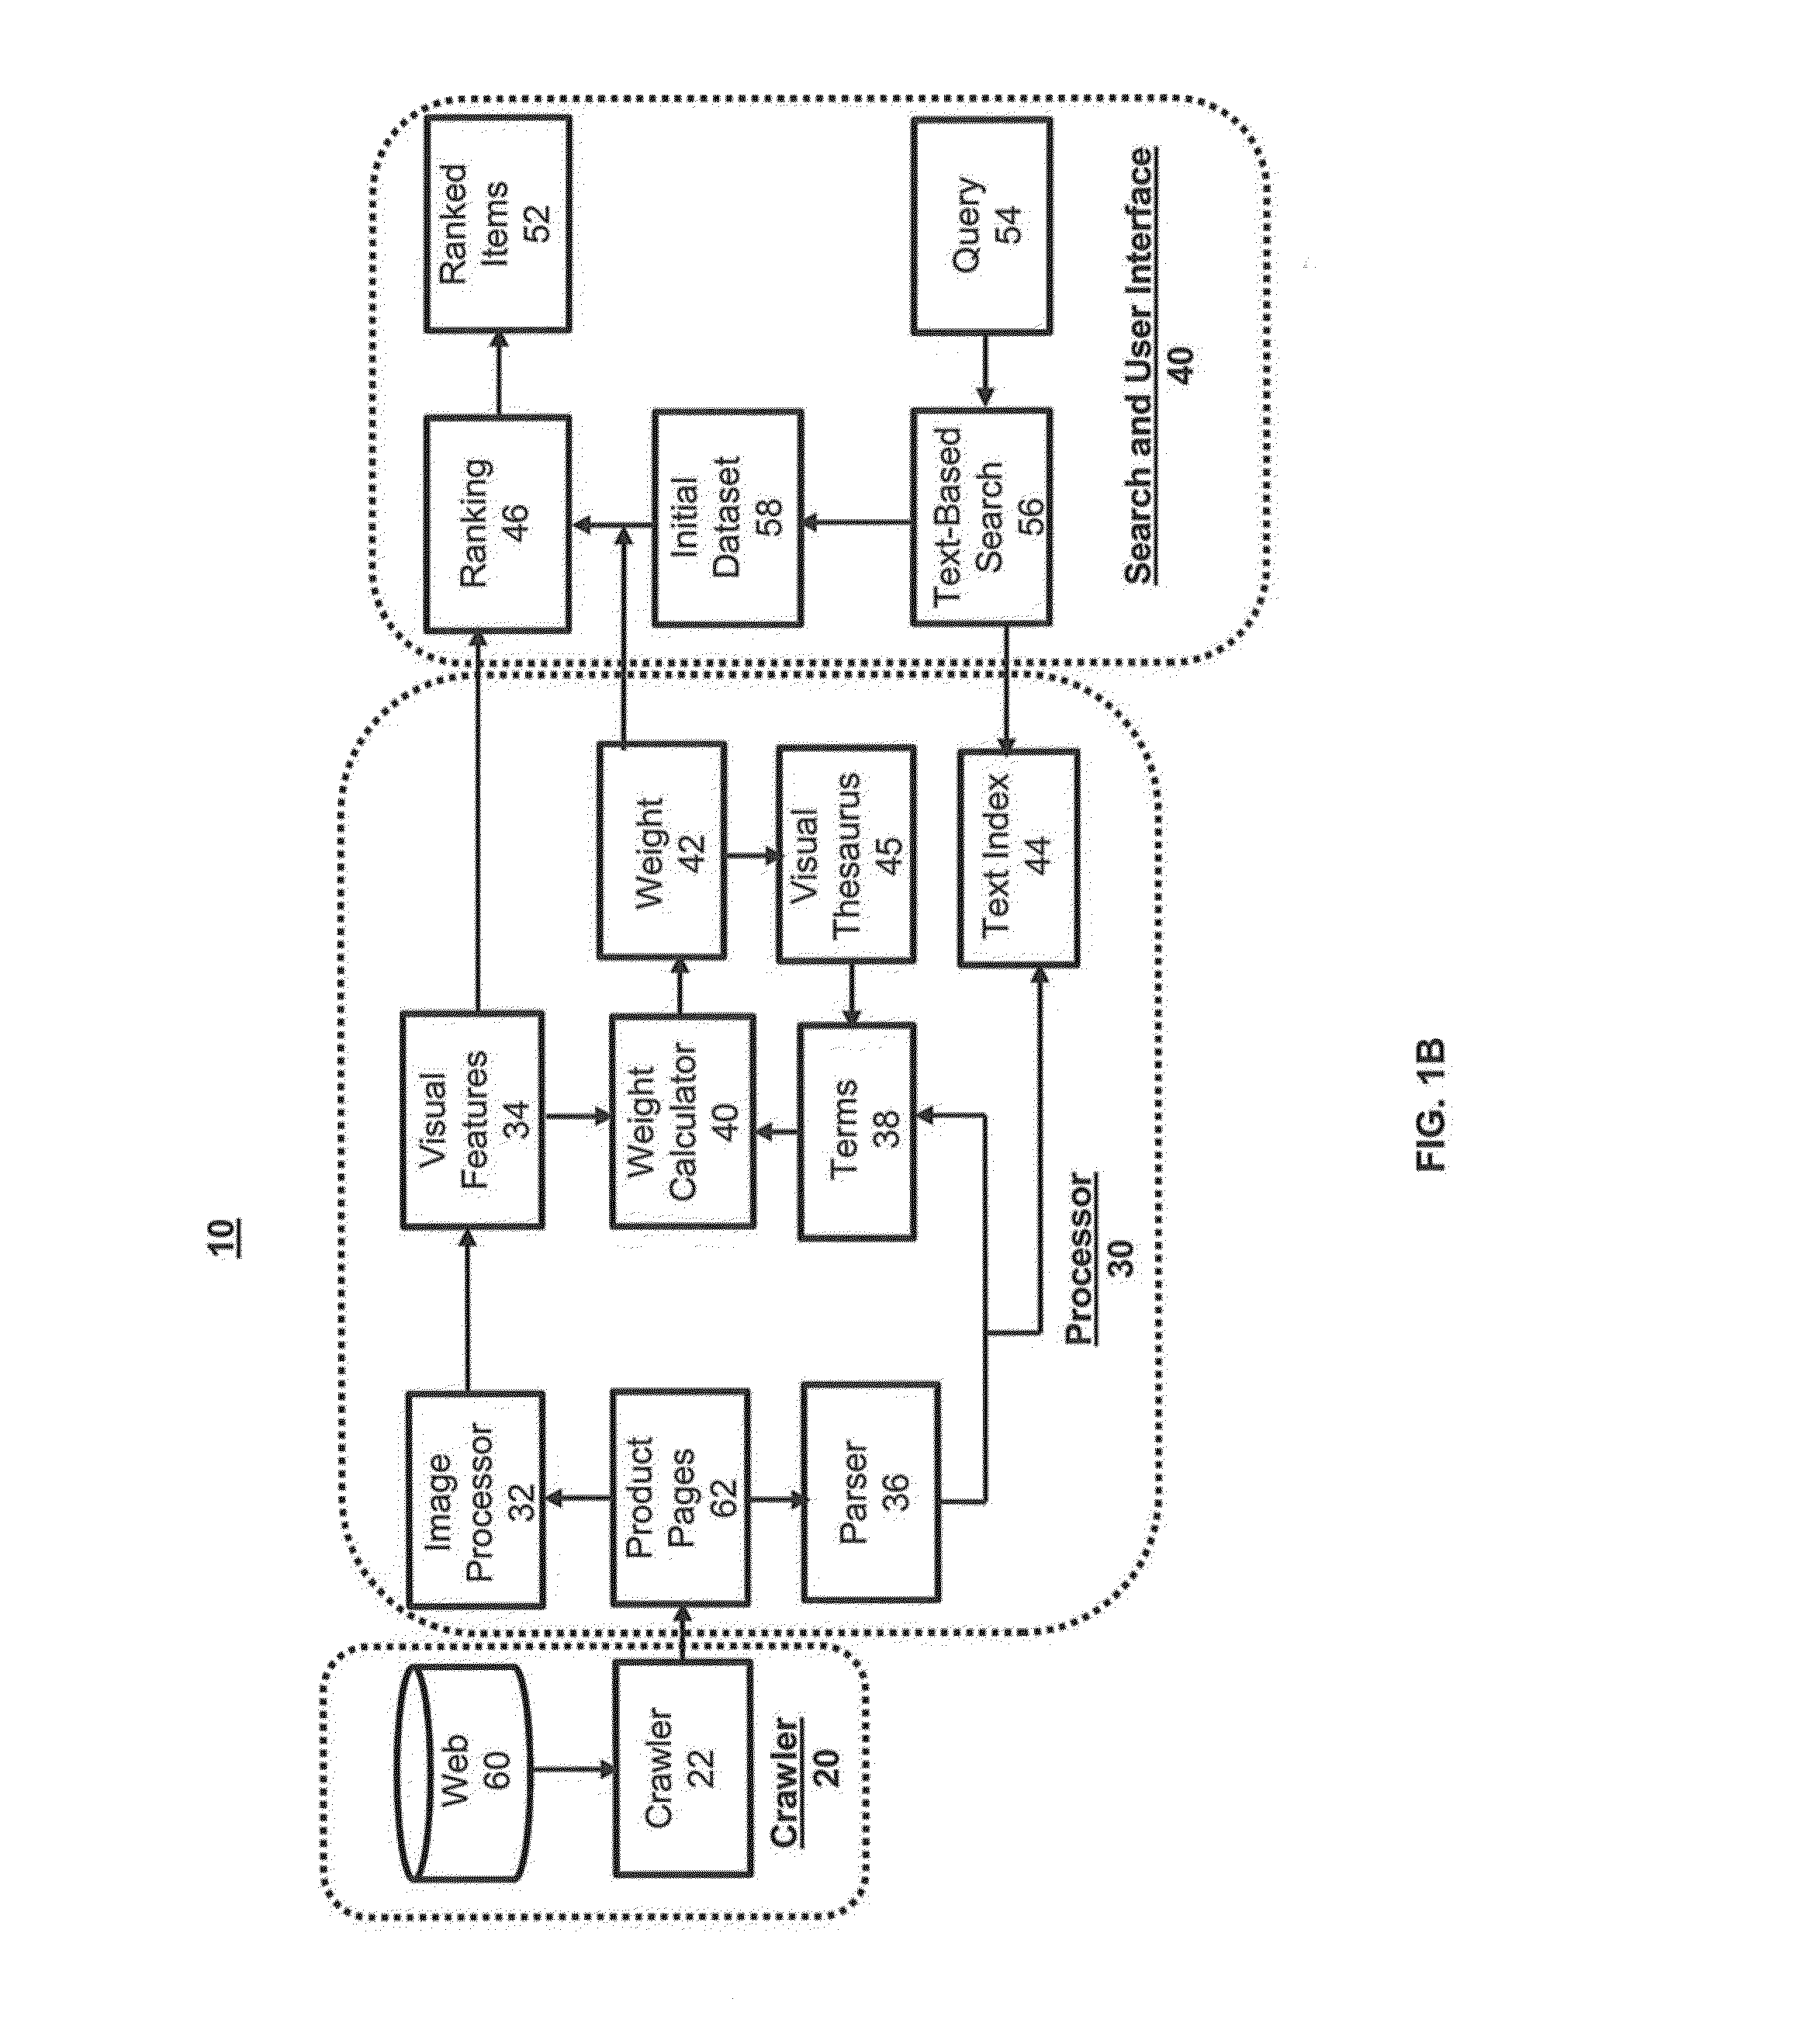 System and methods of integrating visual features and textual features for image searching